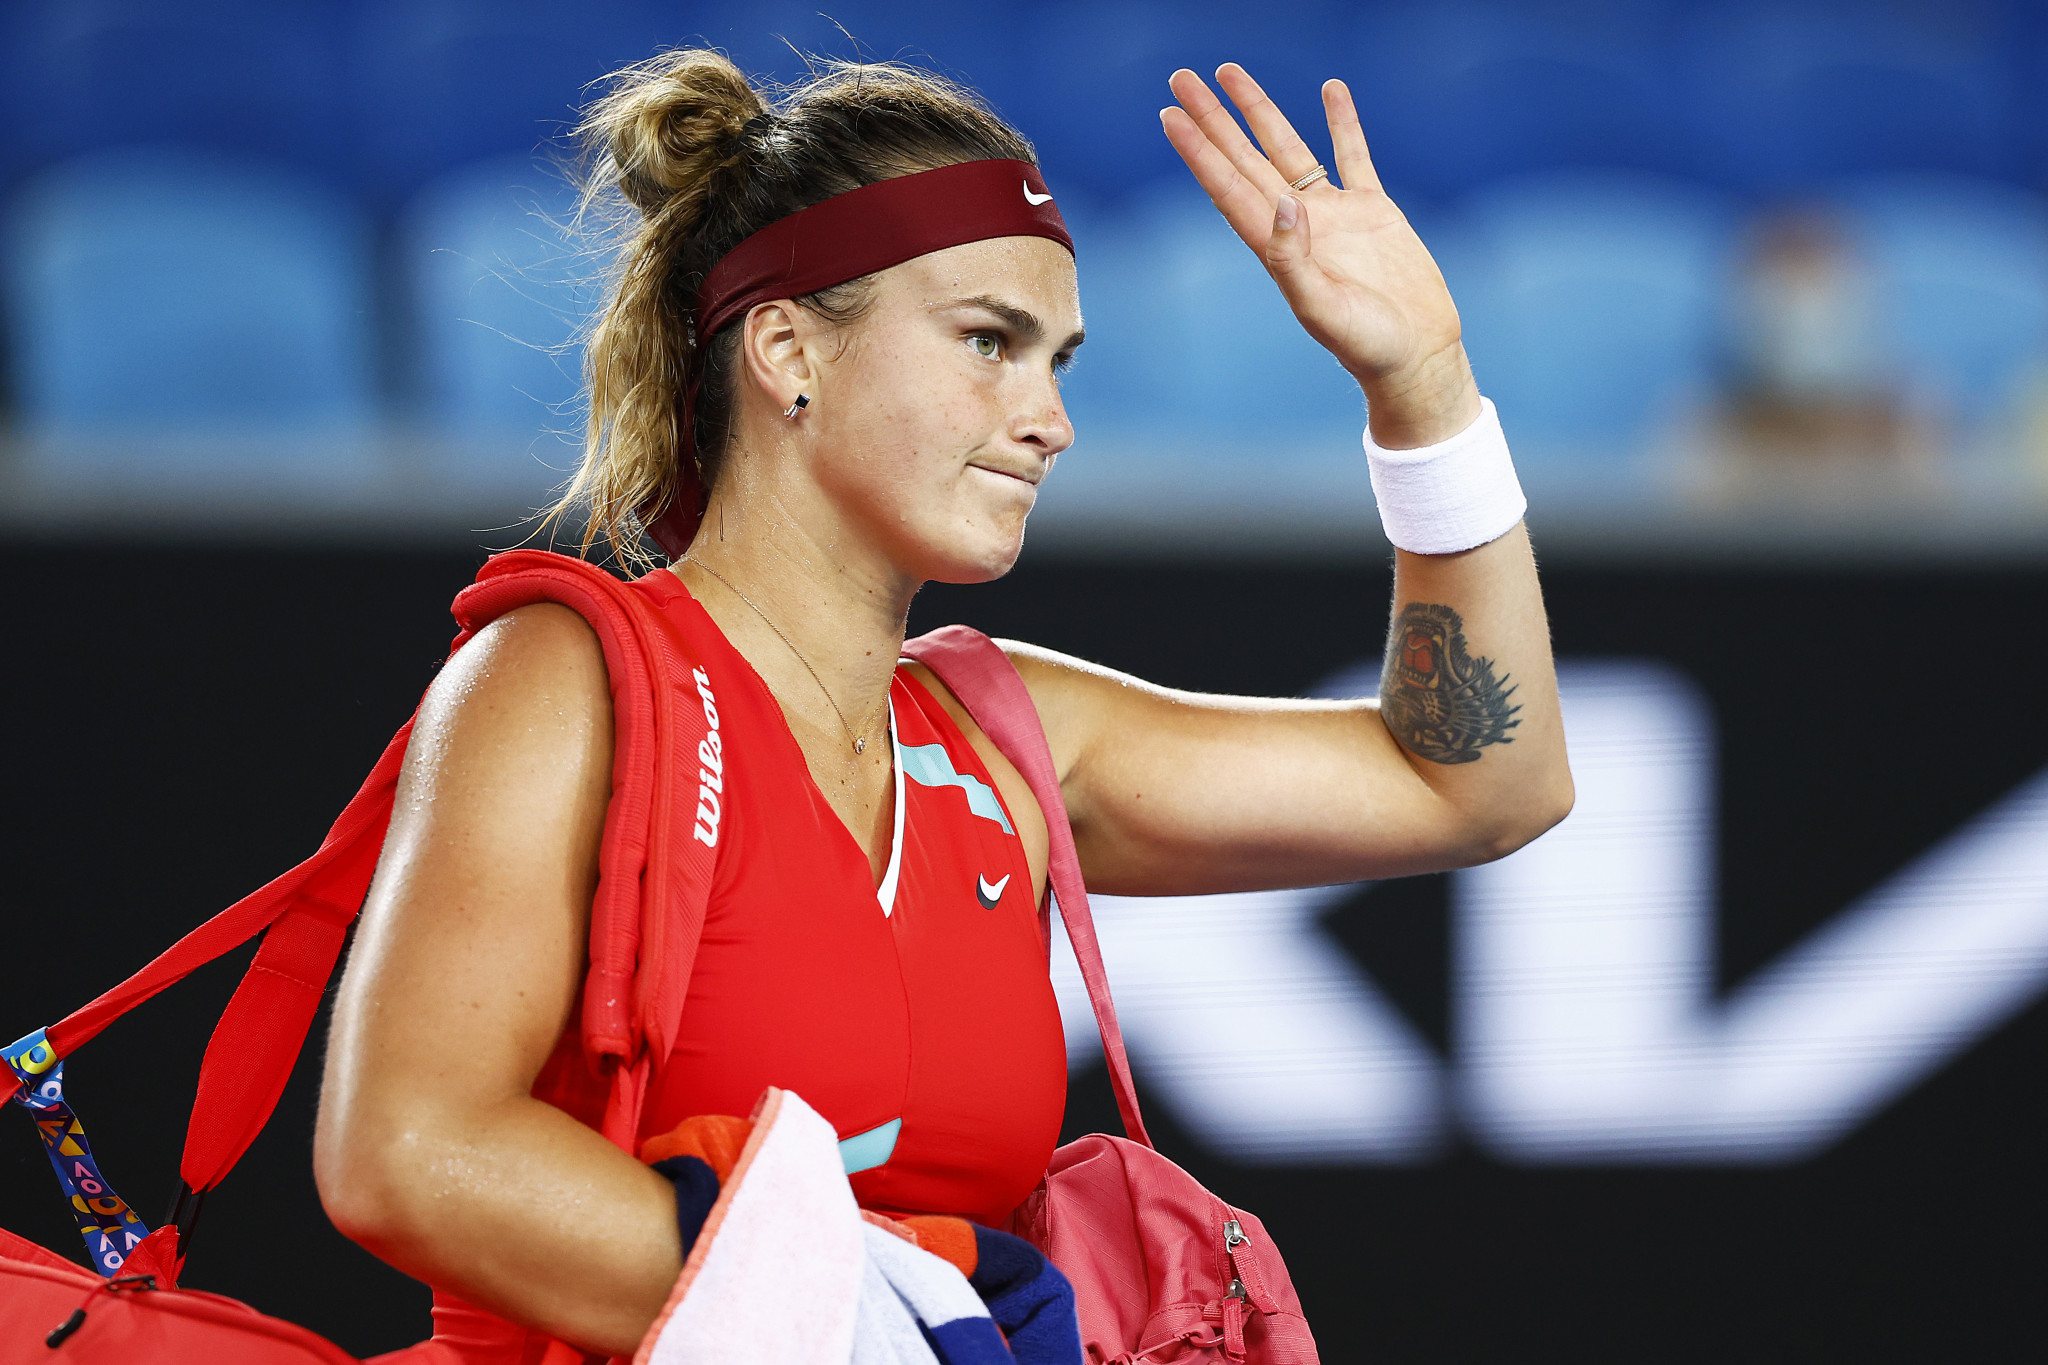 The Belarusian world number two Aryna Sabalenka's wait for a maiden women's singles Grand Slam goes on after she lost to Estonia's Kaia Kanepi in Melbourne ©Getty Images